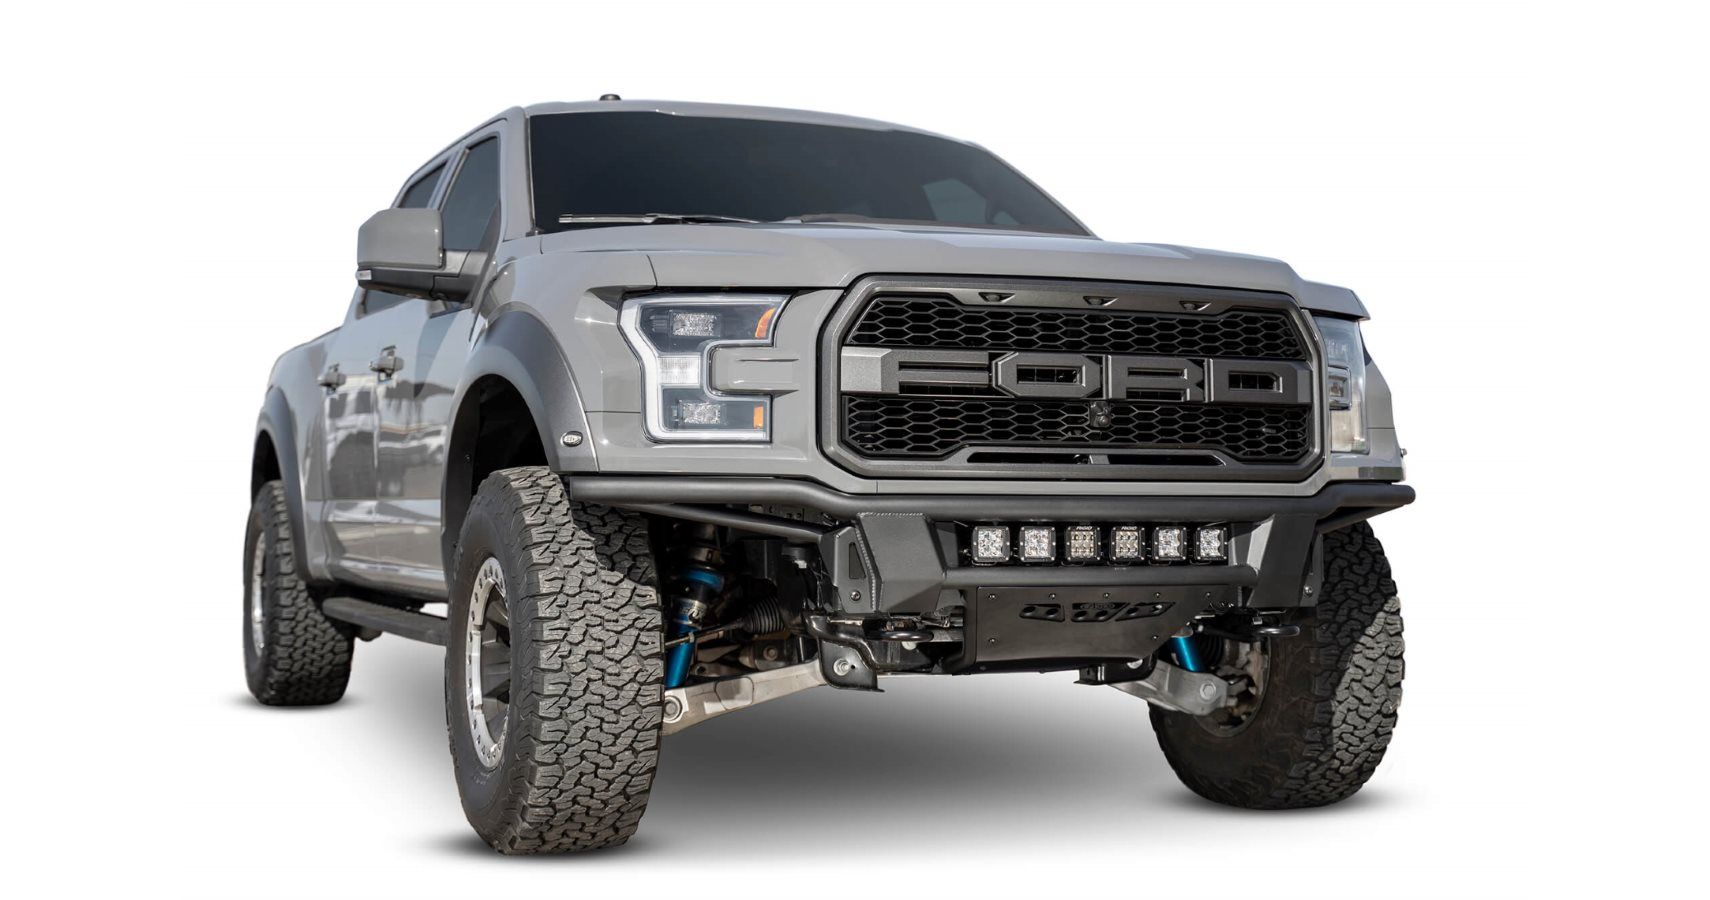 Check Out The 2017 Ford Raptor ADD PRO Bolt-On Bumper